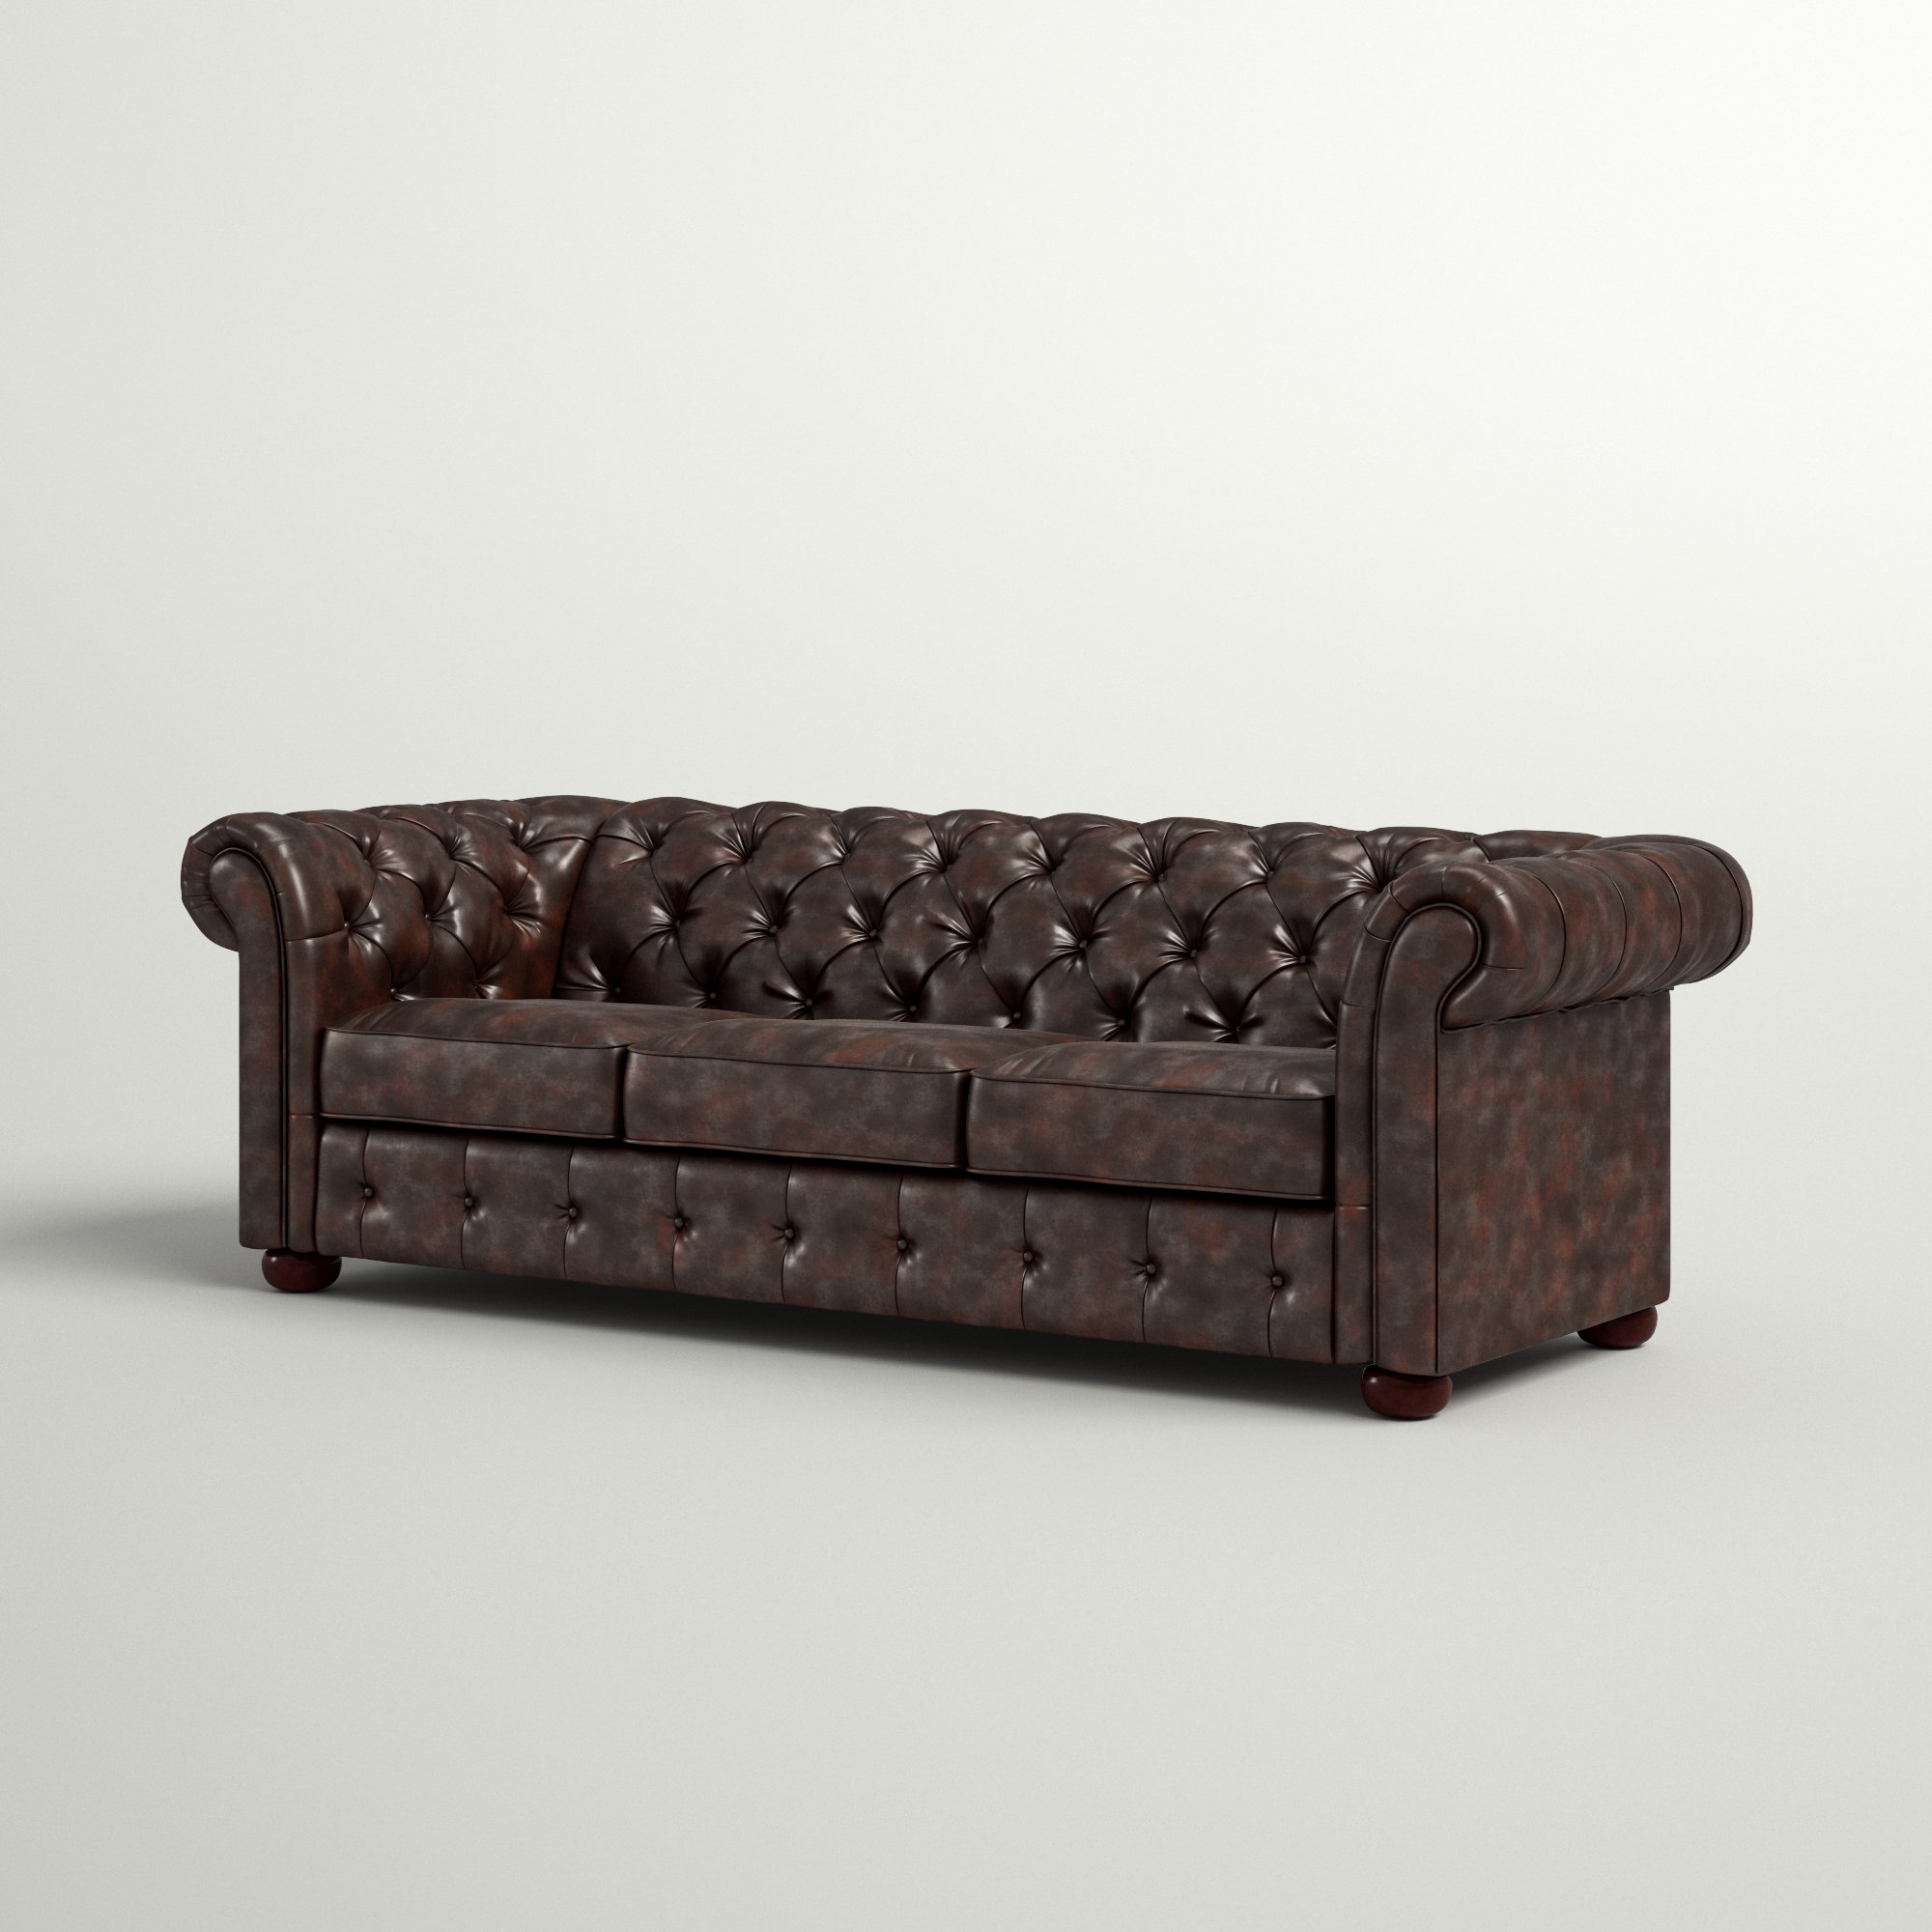 Lucious 91.34” Rolled Arm Chesterfield Sofa with Reversible Cushions